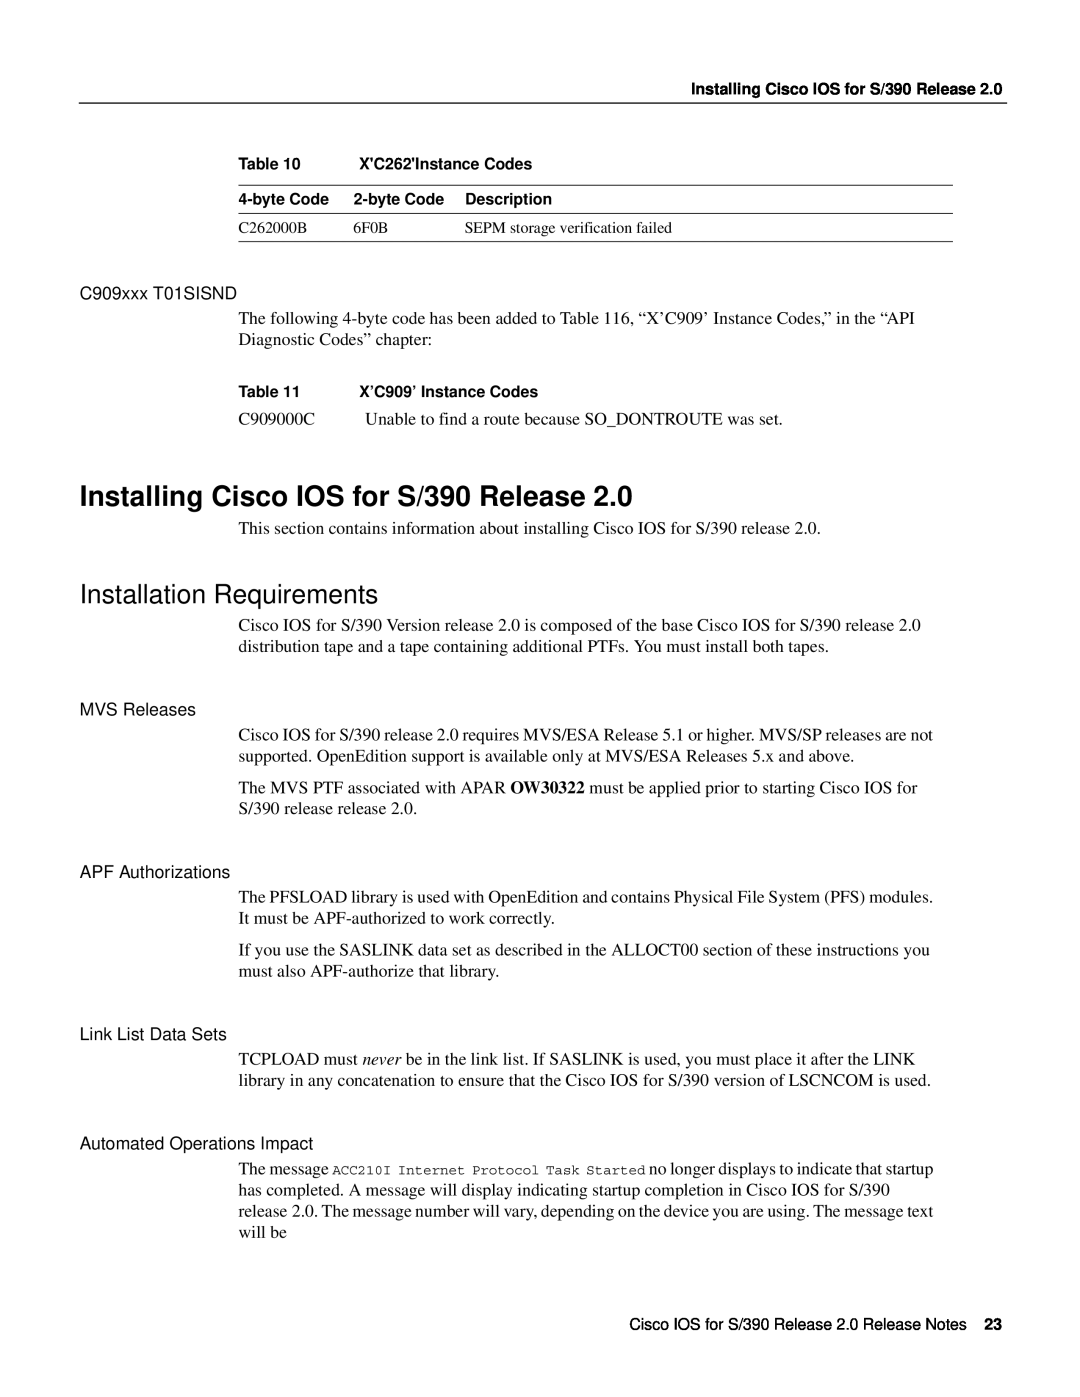 Cisco Systems manual Installing Cisco IOS for S/390 Release, Installation Requirements 